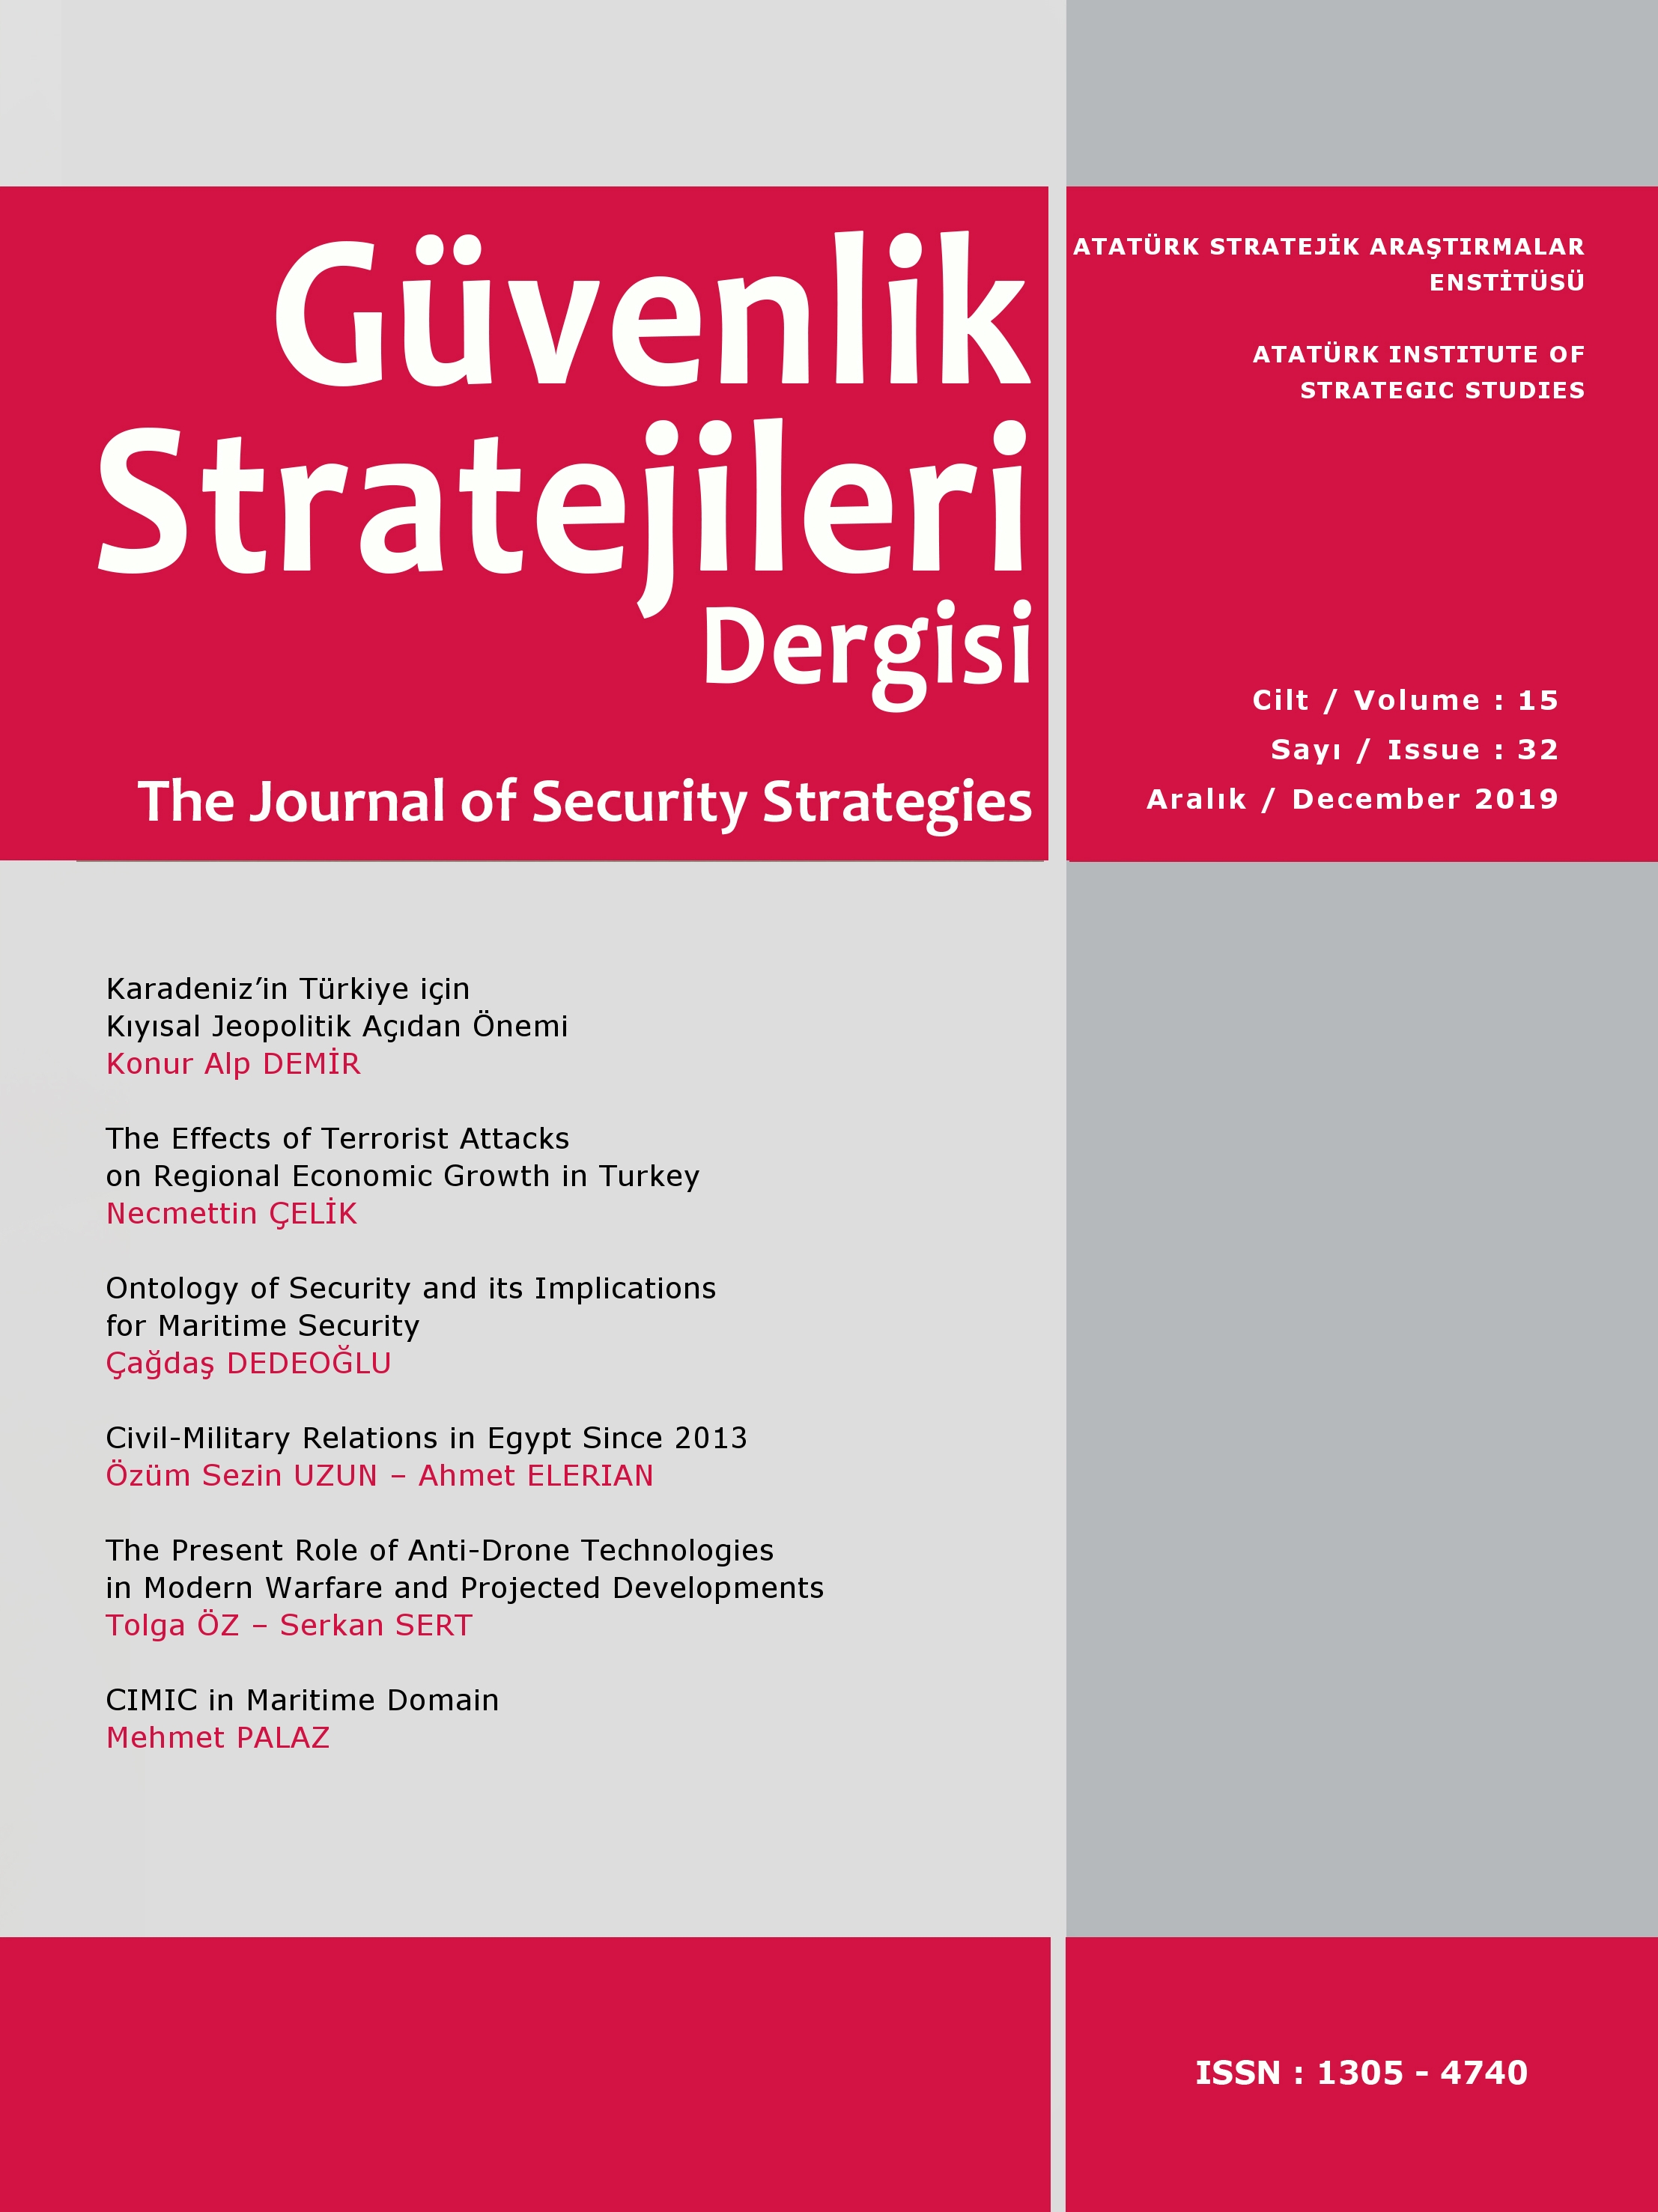 The Ontology of Security and its Implications for Maritime Security Cover Image